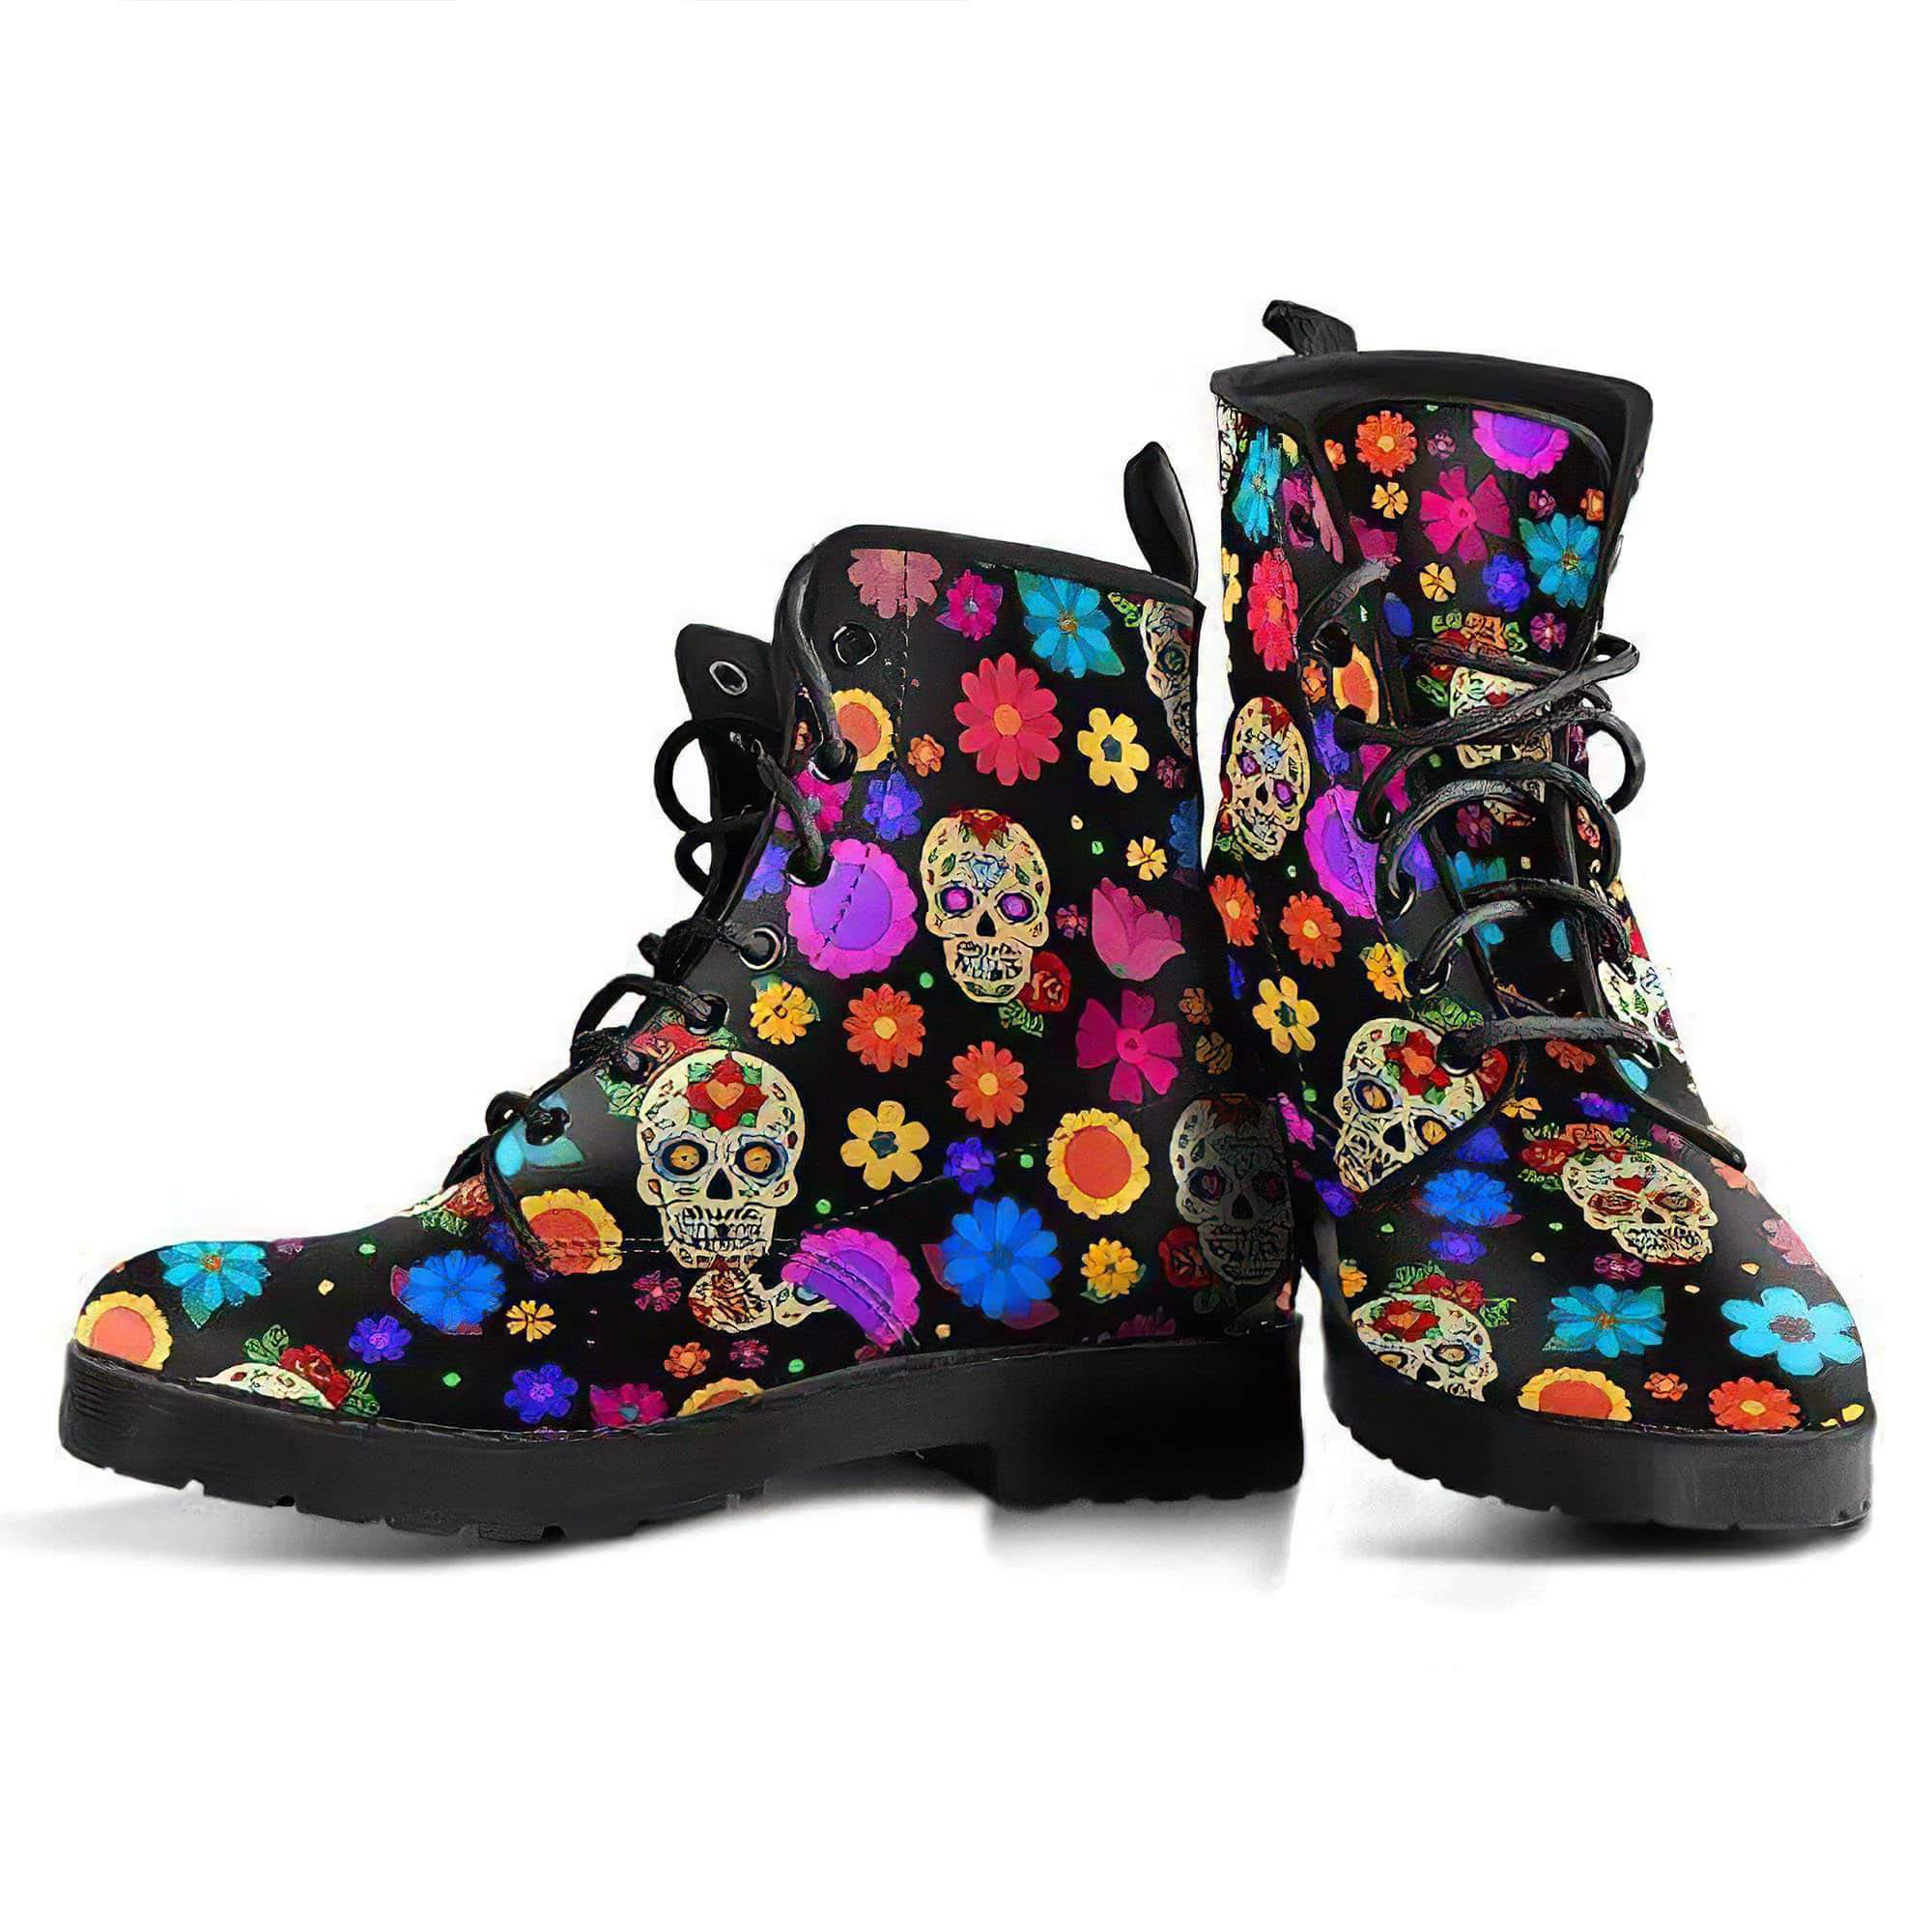 sugar-skull-party-vegan-leather-boots-for-women-women-s-leather-boots-12051955613757.jpg